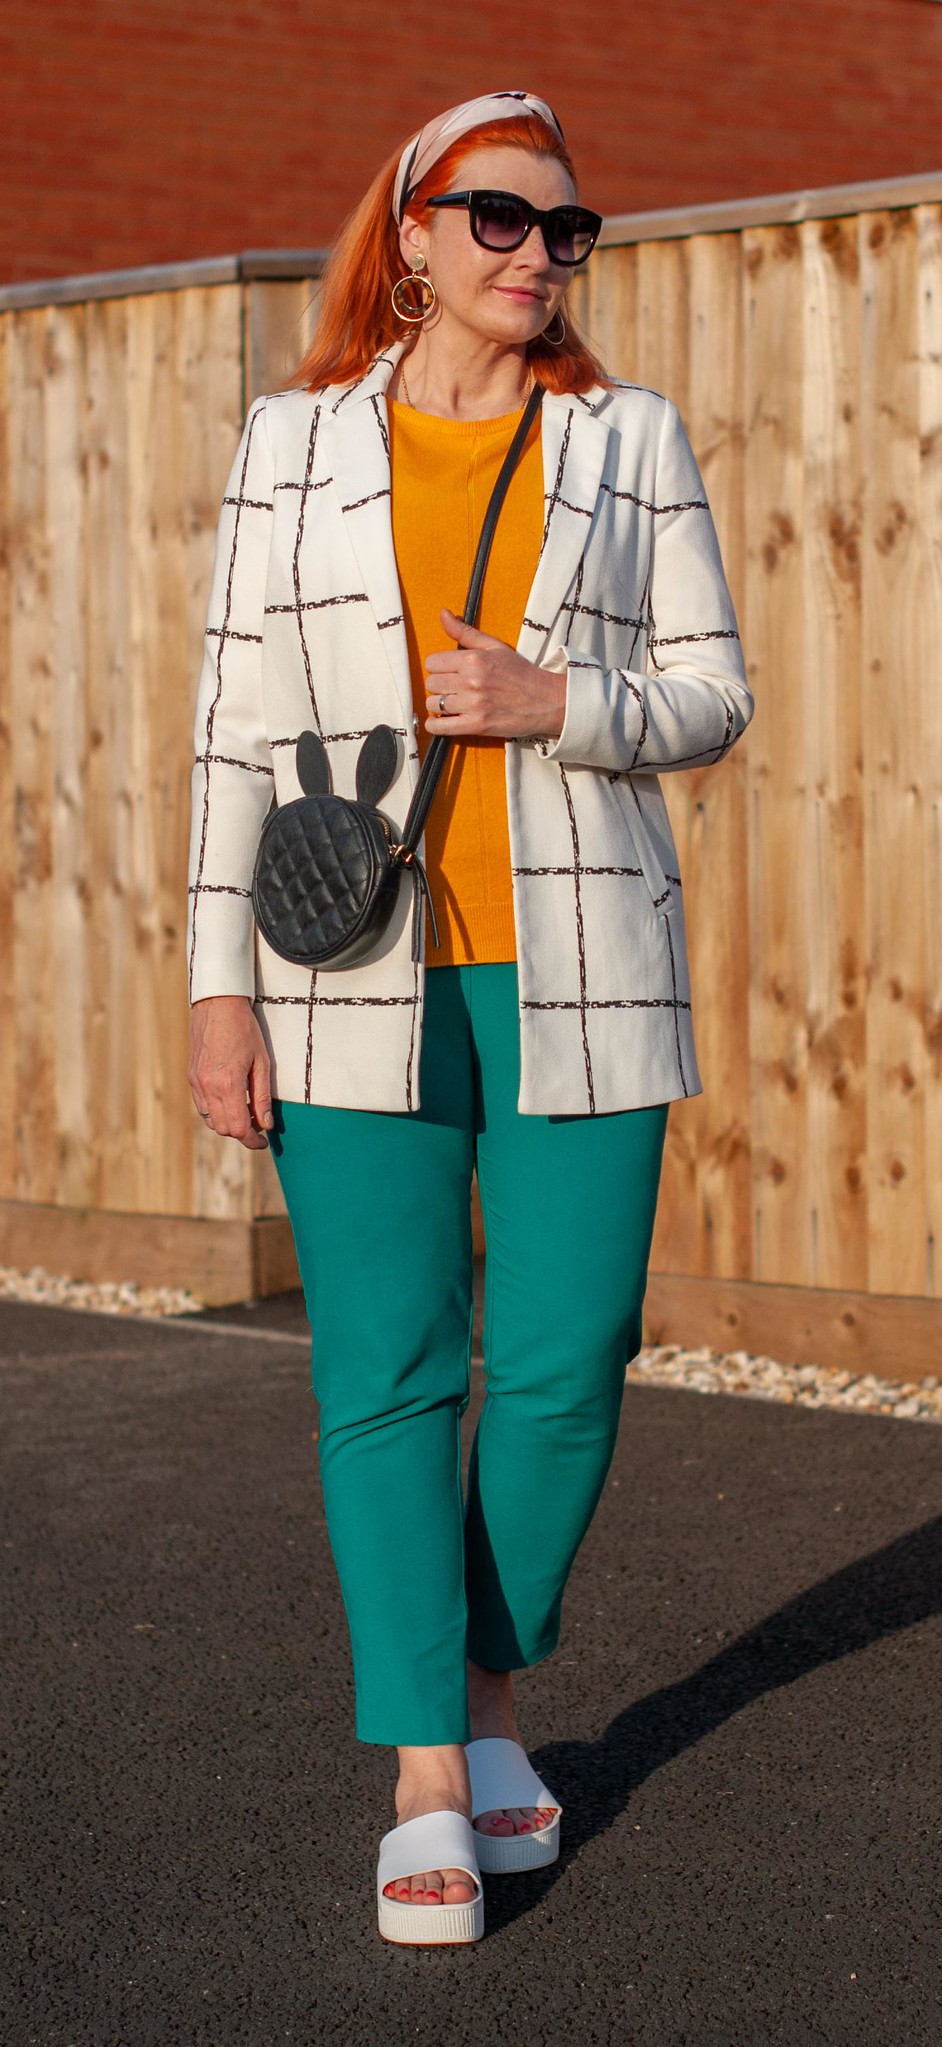 Fashion Over 40: Why You Should Try Orange, Green and White (and Marmite Shoes) | Not Dressed As Lamb, over 40 style blog